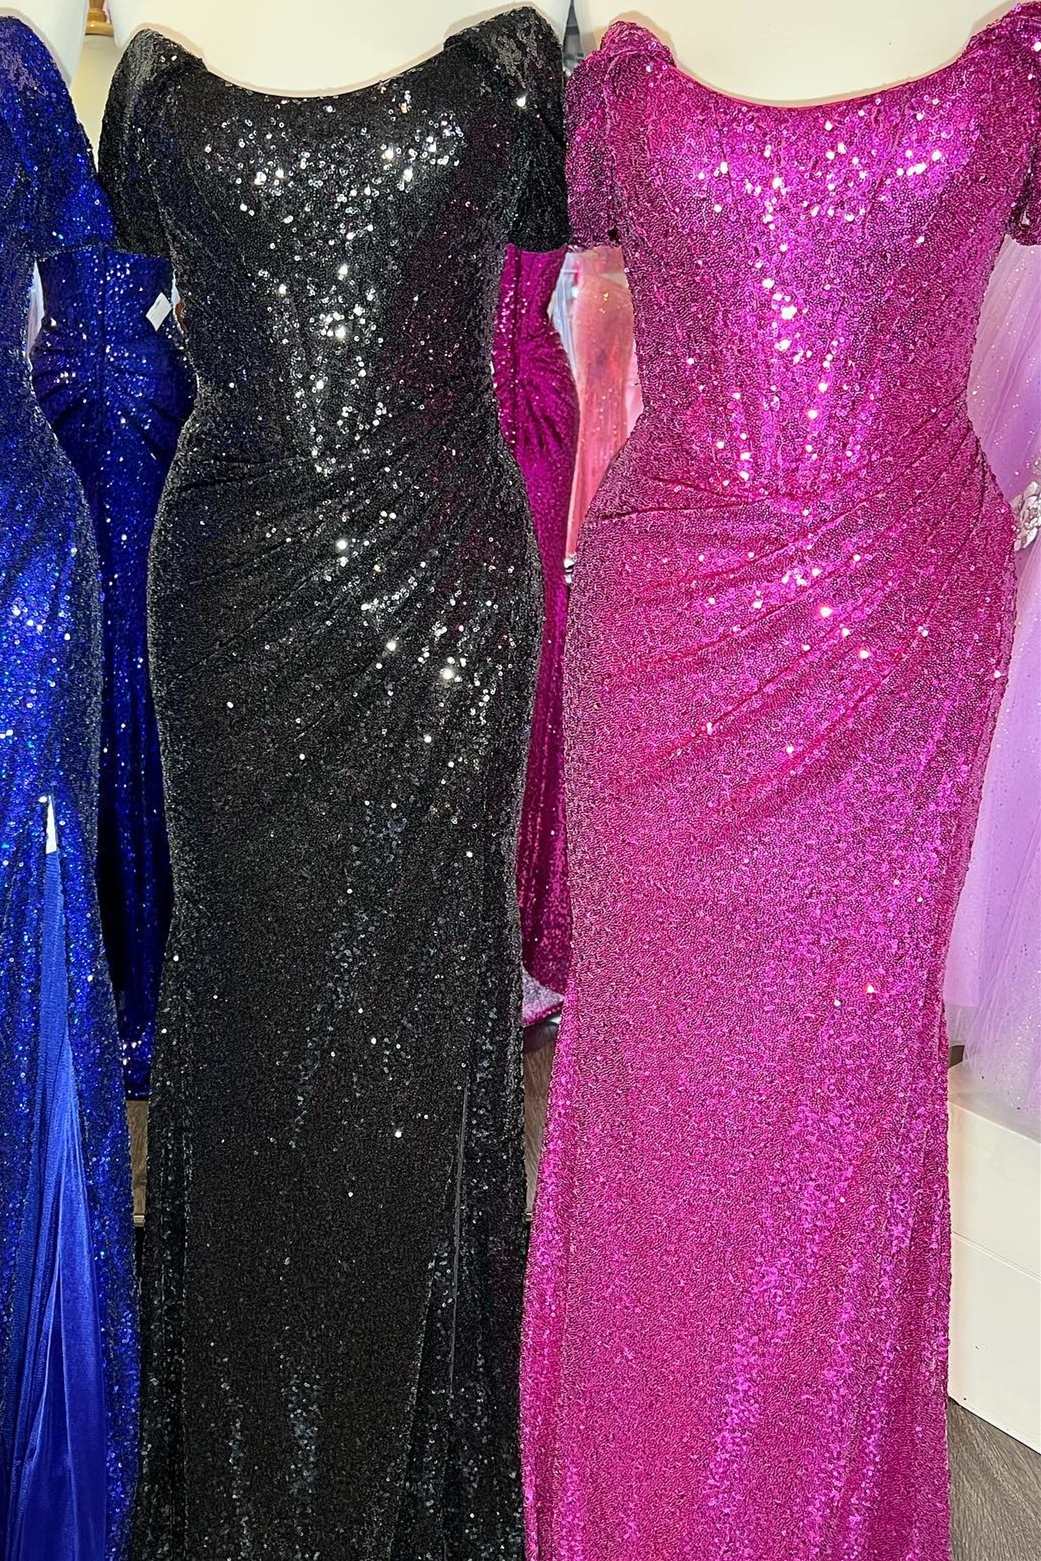 dressimeMermaid Off the Shoulder Sequins Long Prom Dress with Slit 